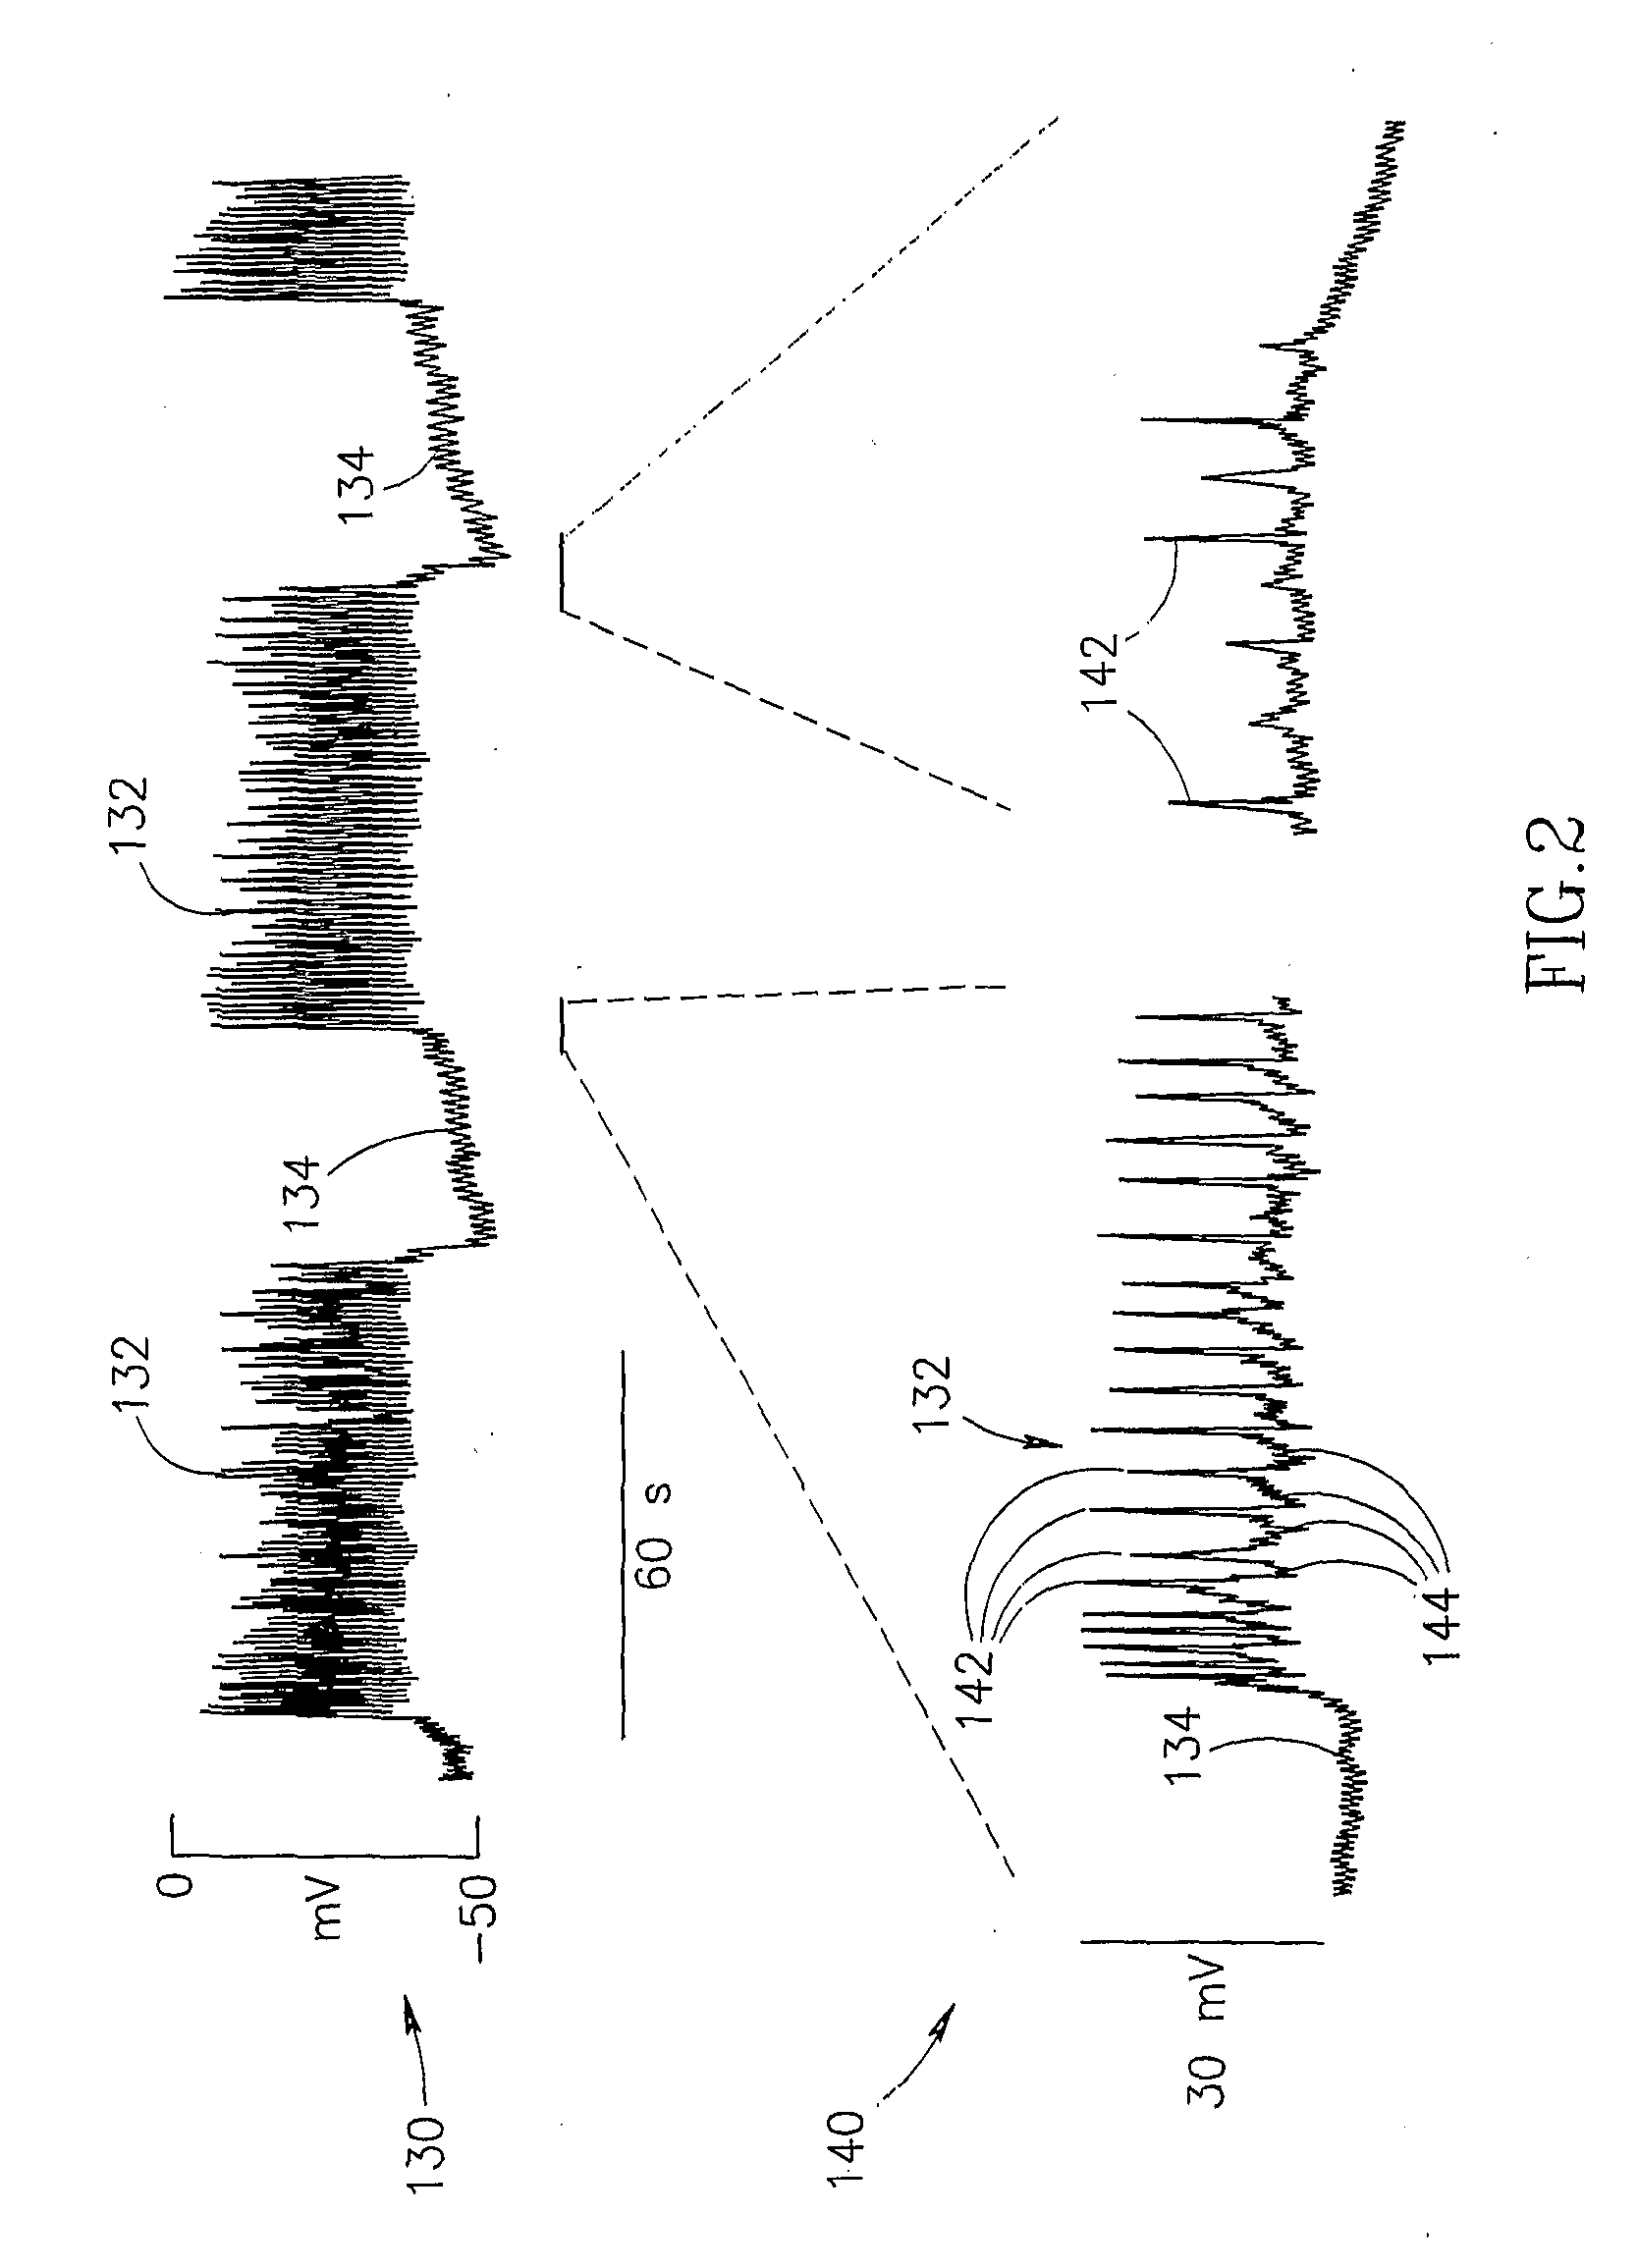 Gastrointestinal Methods And Apparatus For Use In Treating Disorders And Controlling Blood Sugar